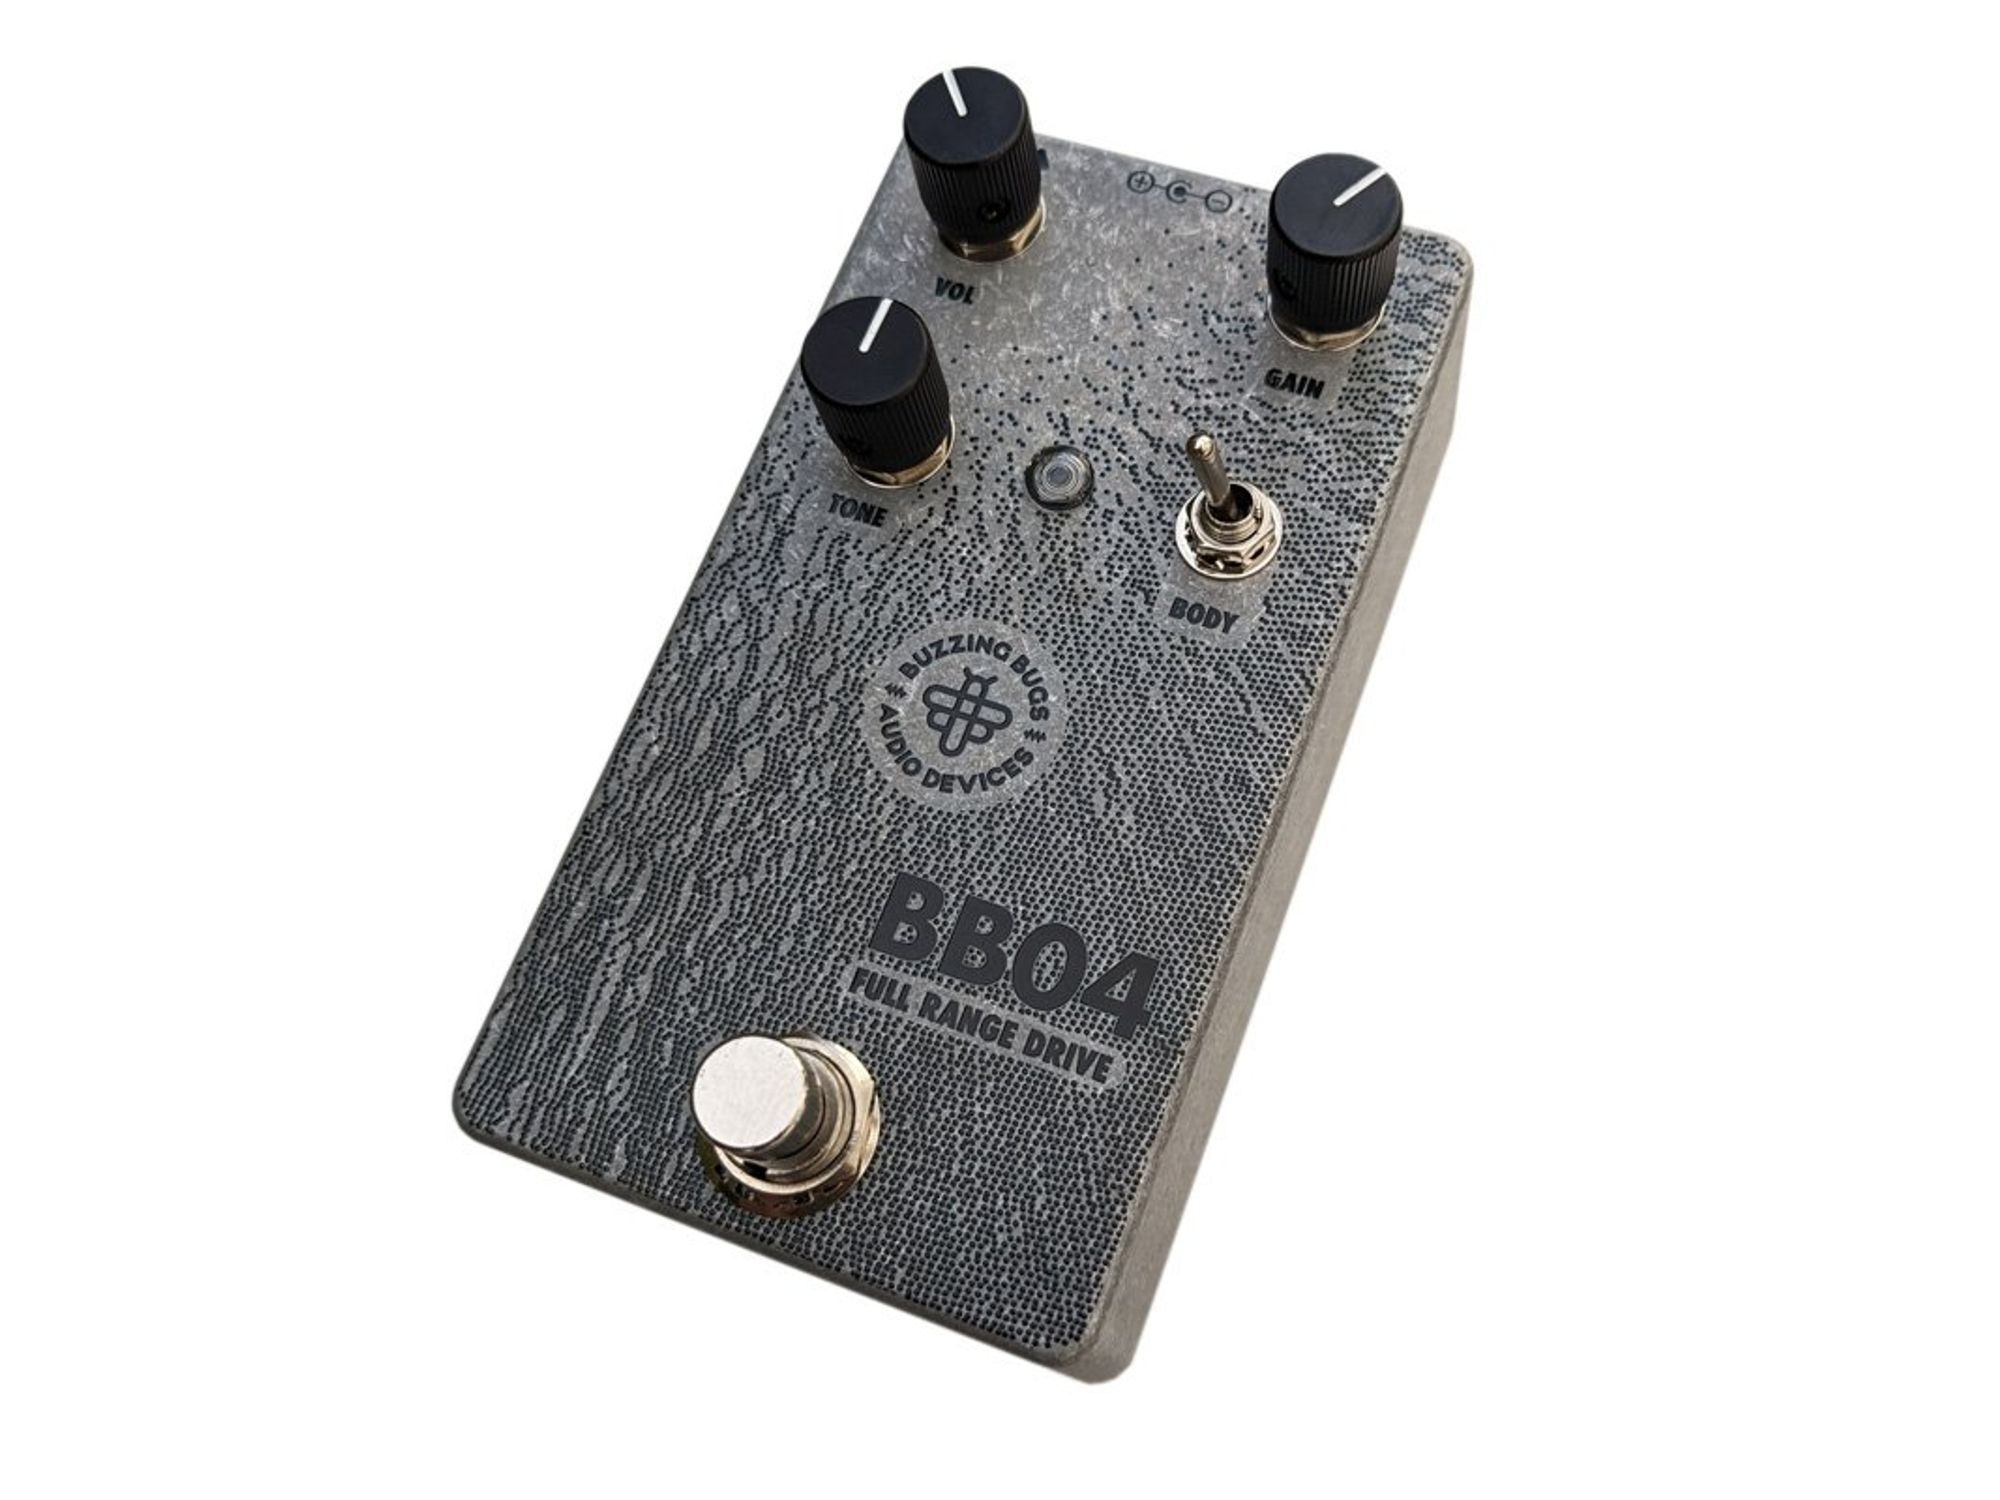 Buzzing Bugs Introduces the BB04 Full Range Drive Pedal